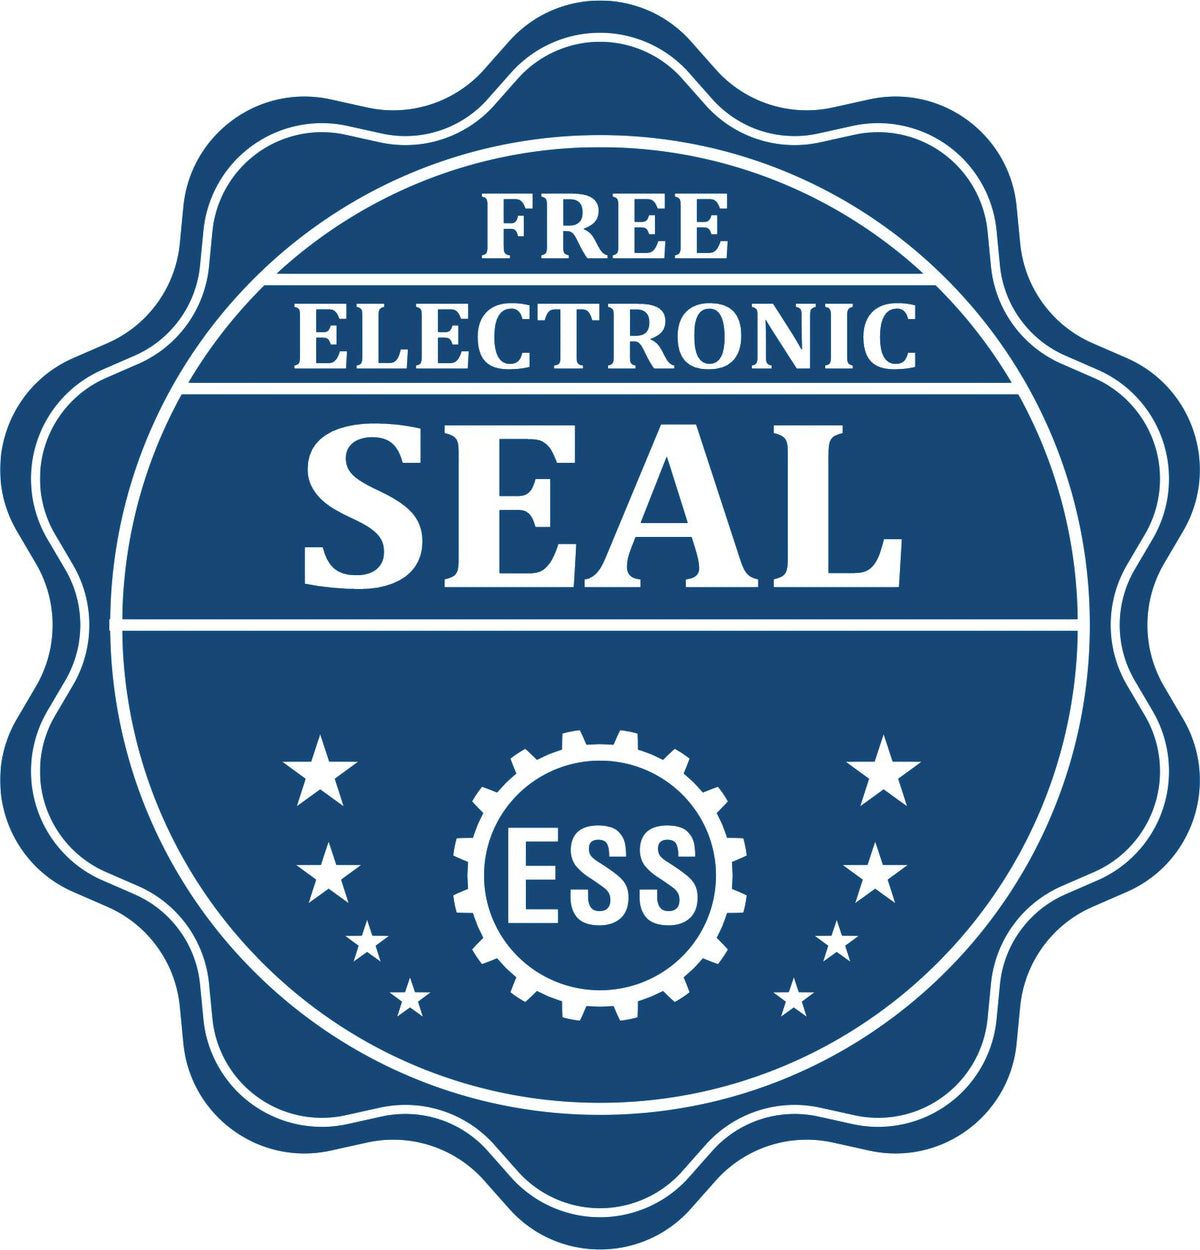 A badge showing a free electronic seal for the PSI Montana Notary Stamp with stars and the ESS gear on the emblem.